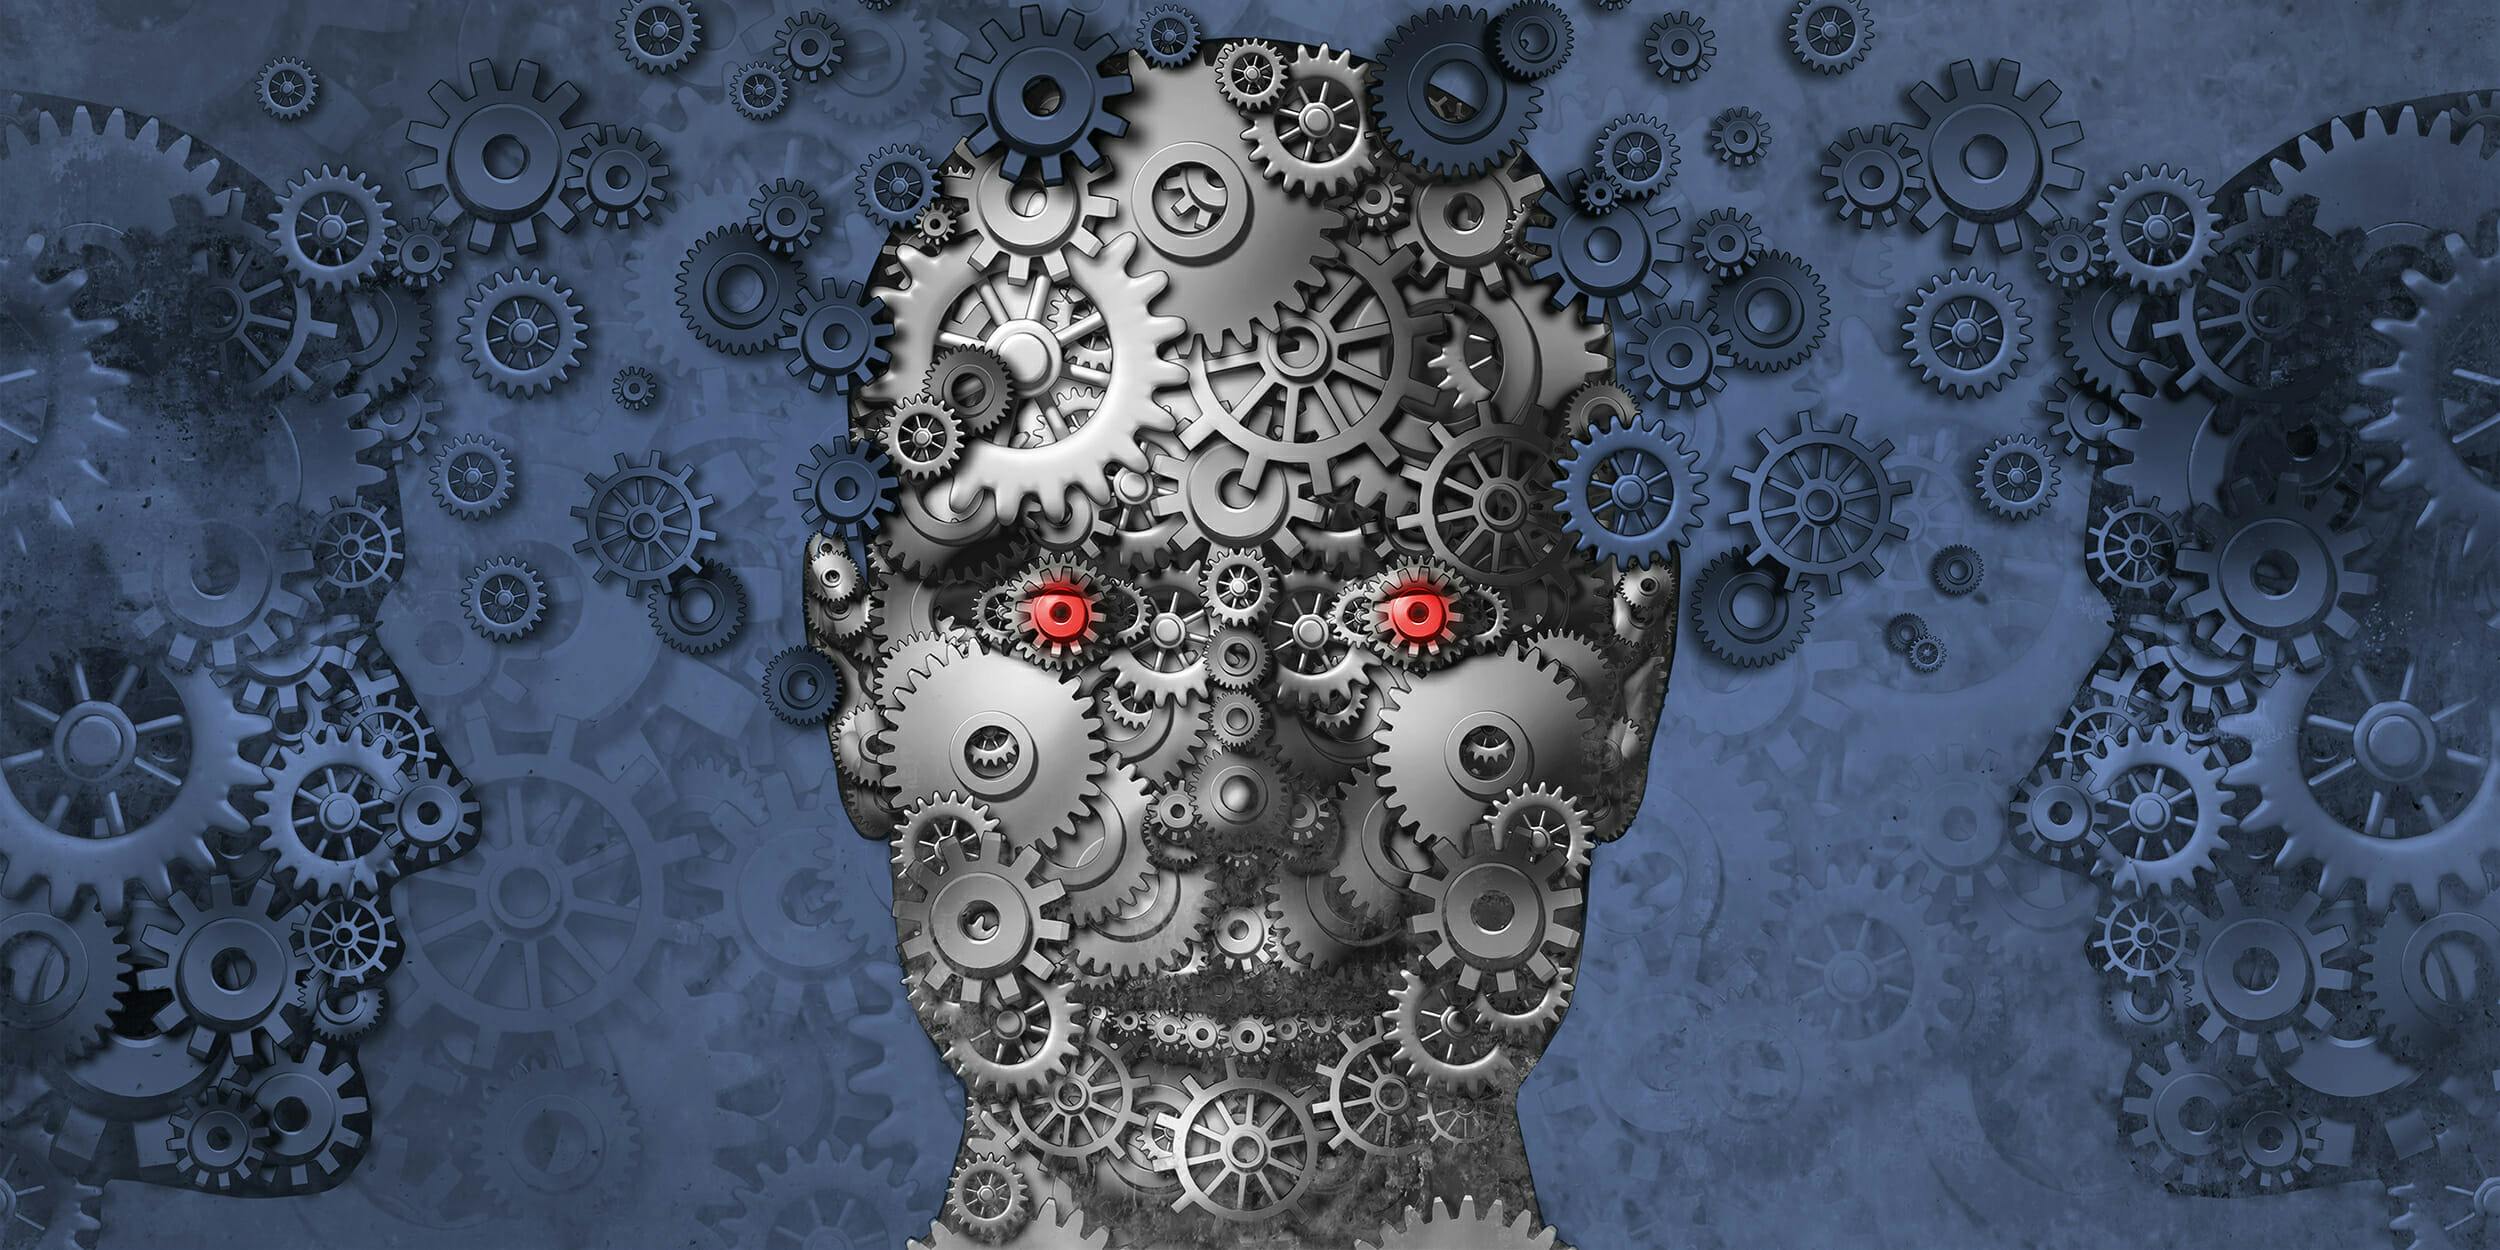 AI Malware: How Hackers Can Use Artificial Intelligence Against You